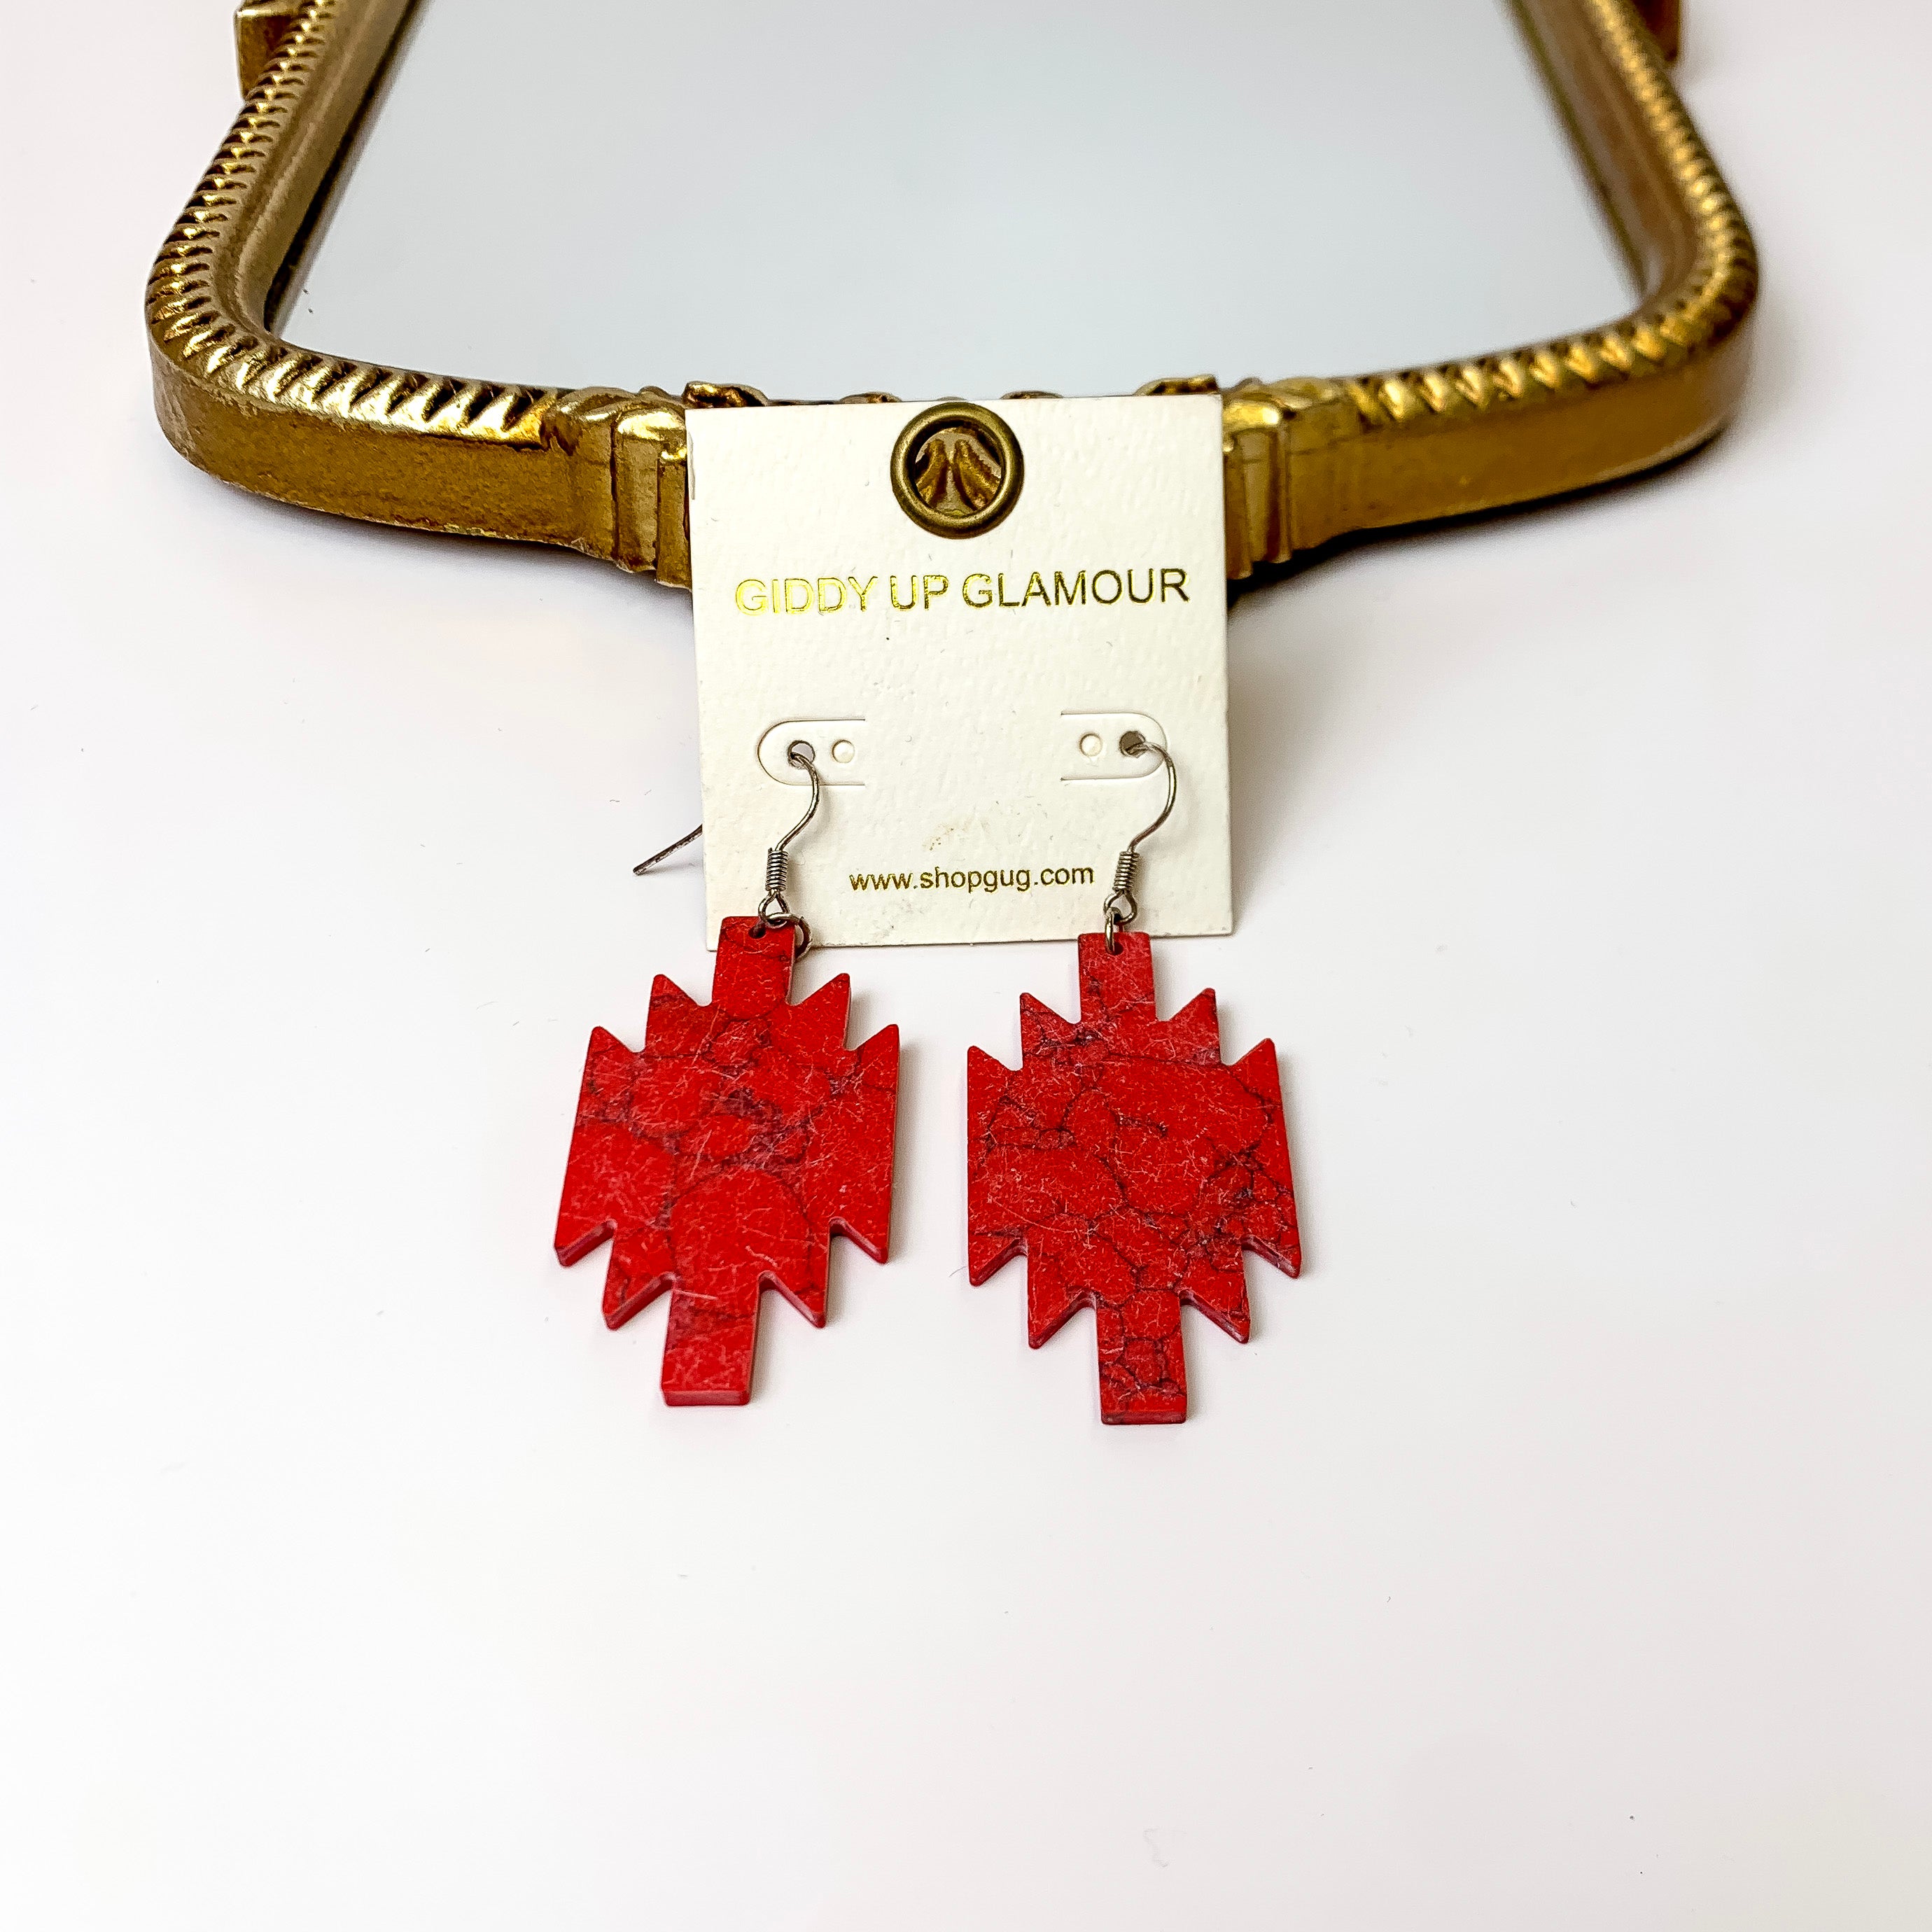 Stone Cold Aztec Cutout Earrings in Red - Giddy Up Glamour Boutique